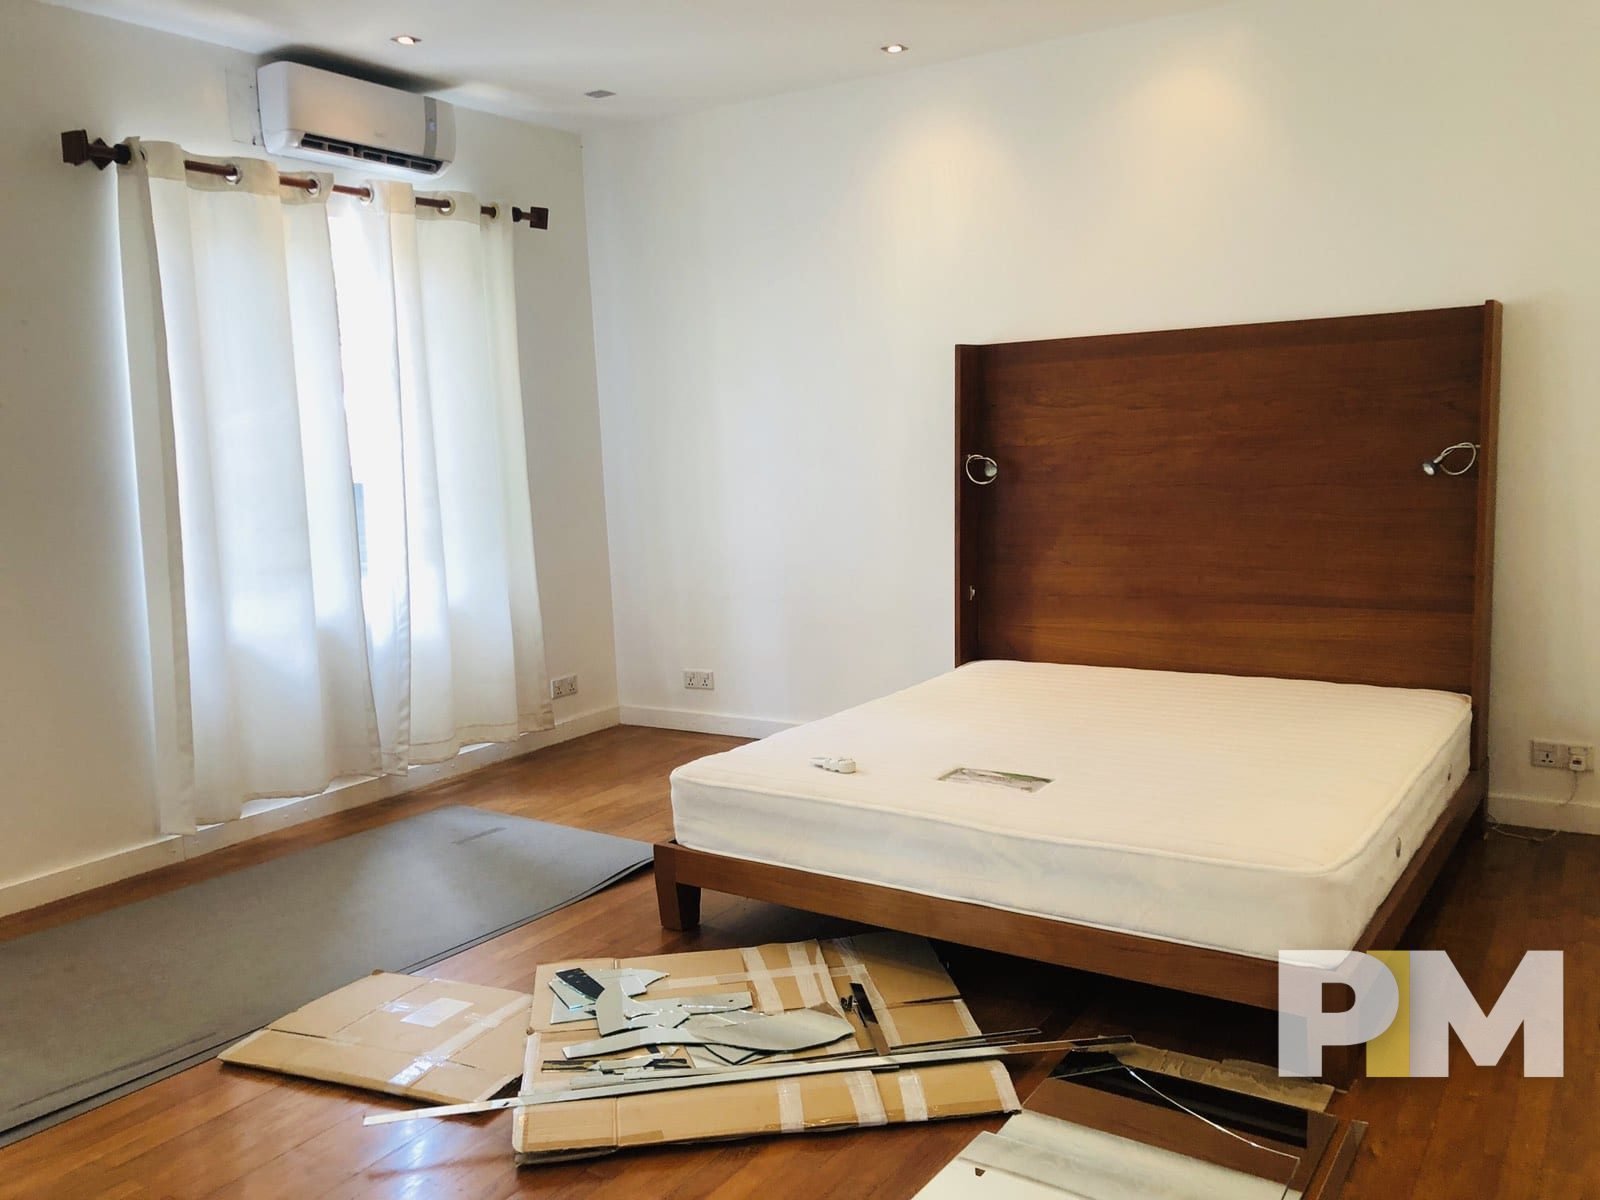 Bedroom with air conditioning - Myanmar Real Estate